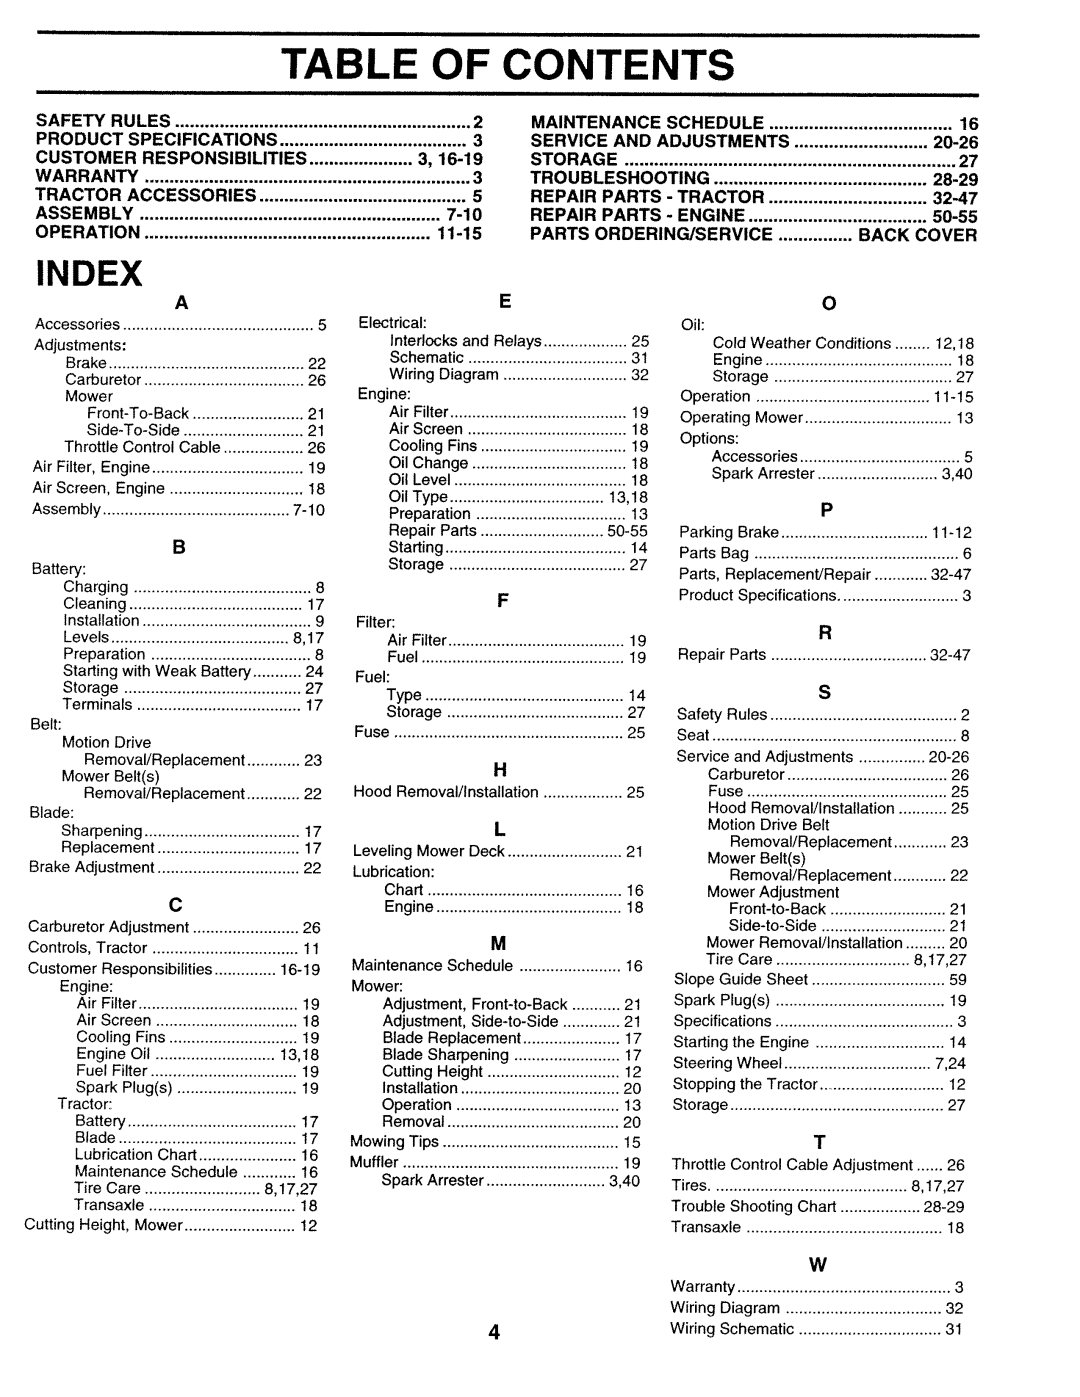 Sears 917.25271 Table, Contents, Index, Safety Rules, Product, Specifications, Customer, Responsibilities, Warranty, 7-10 